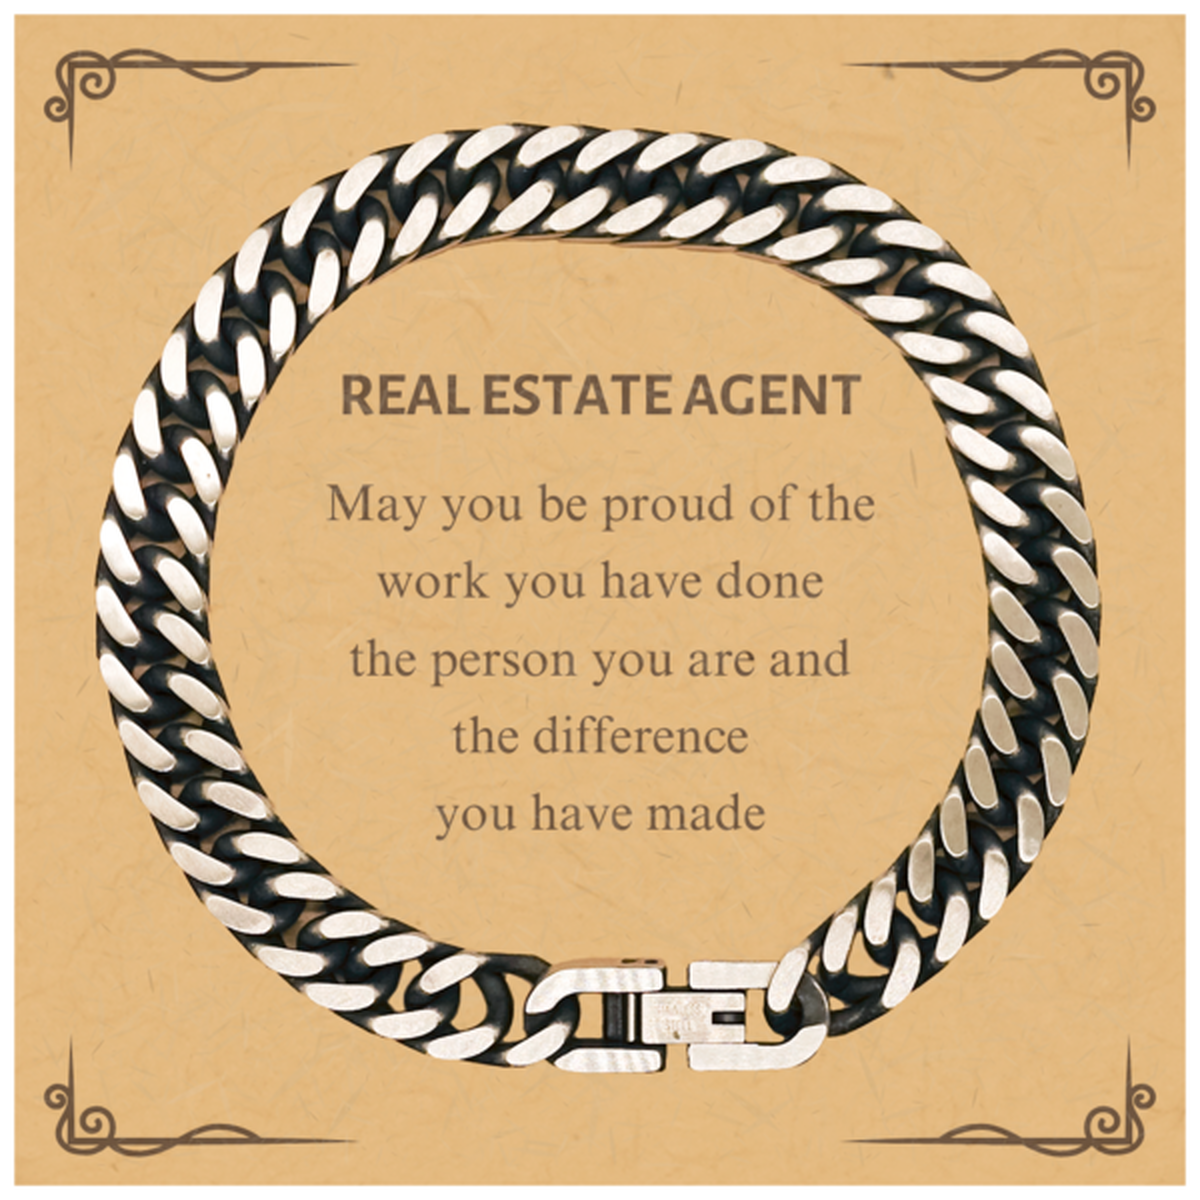 Real Estate Agent May you be proud of the work you have done, Retirement Real Estate Agent Cuban Link Chain Bracelet for Colleague Appreciation Gifts Amazing for Real Estate Agent